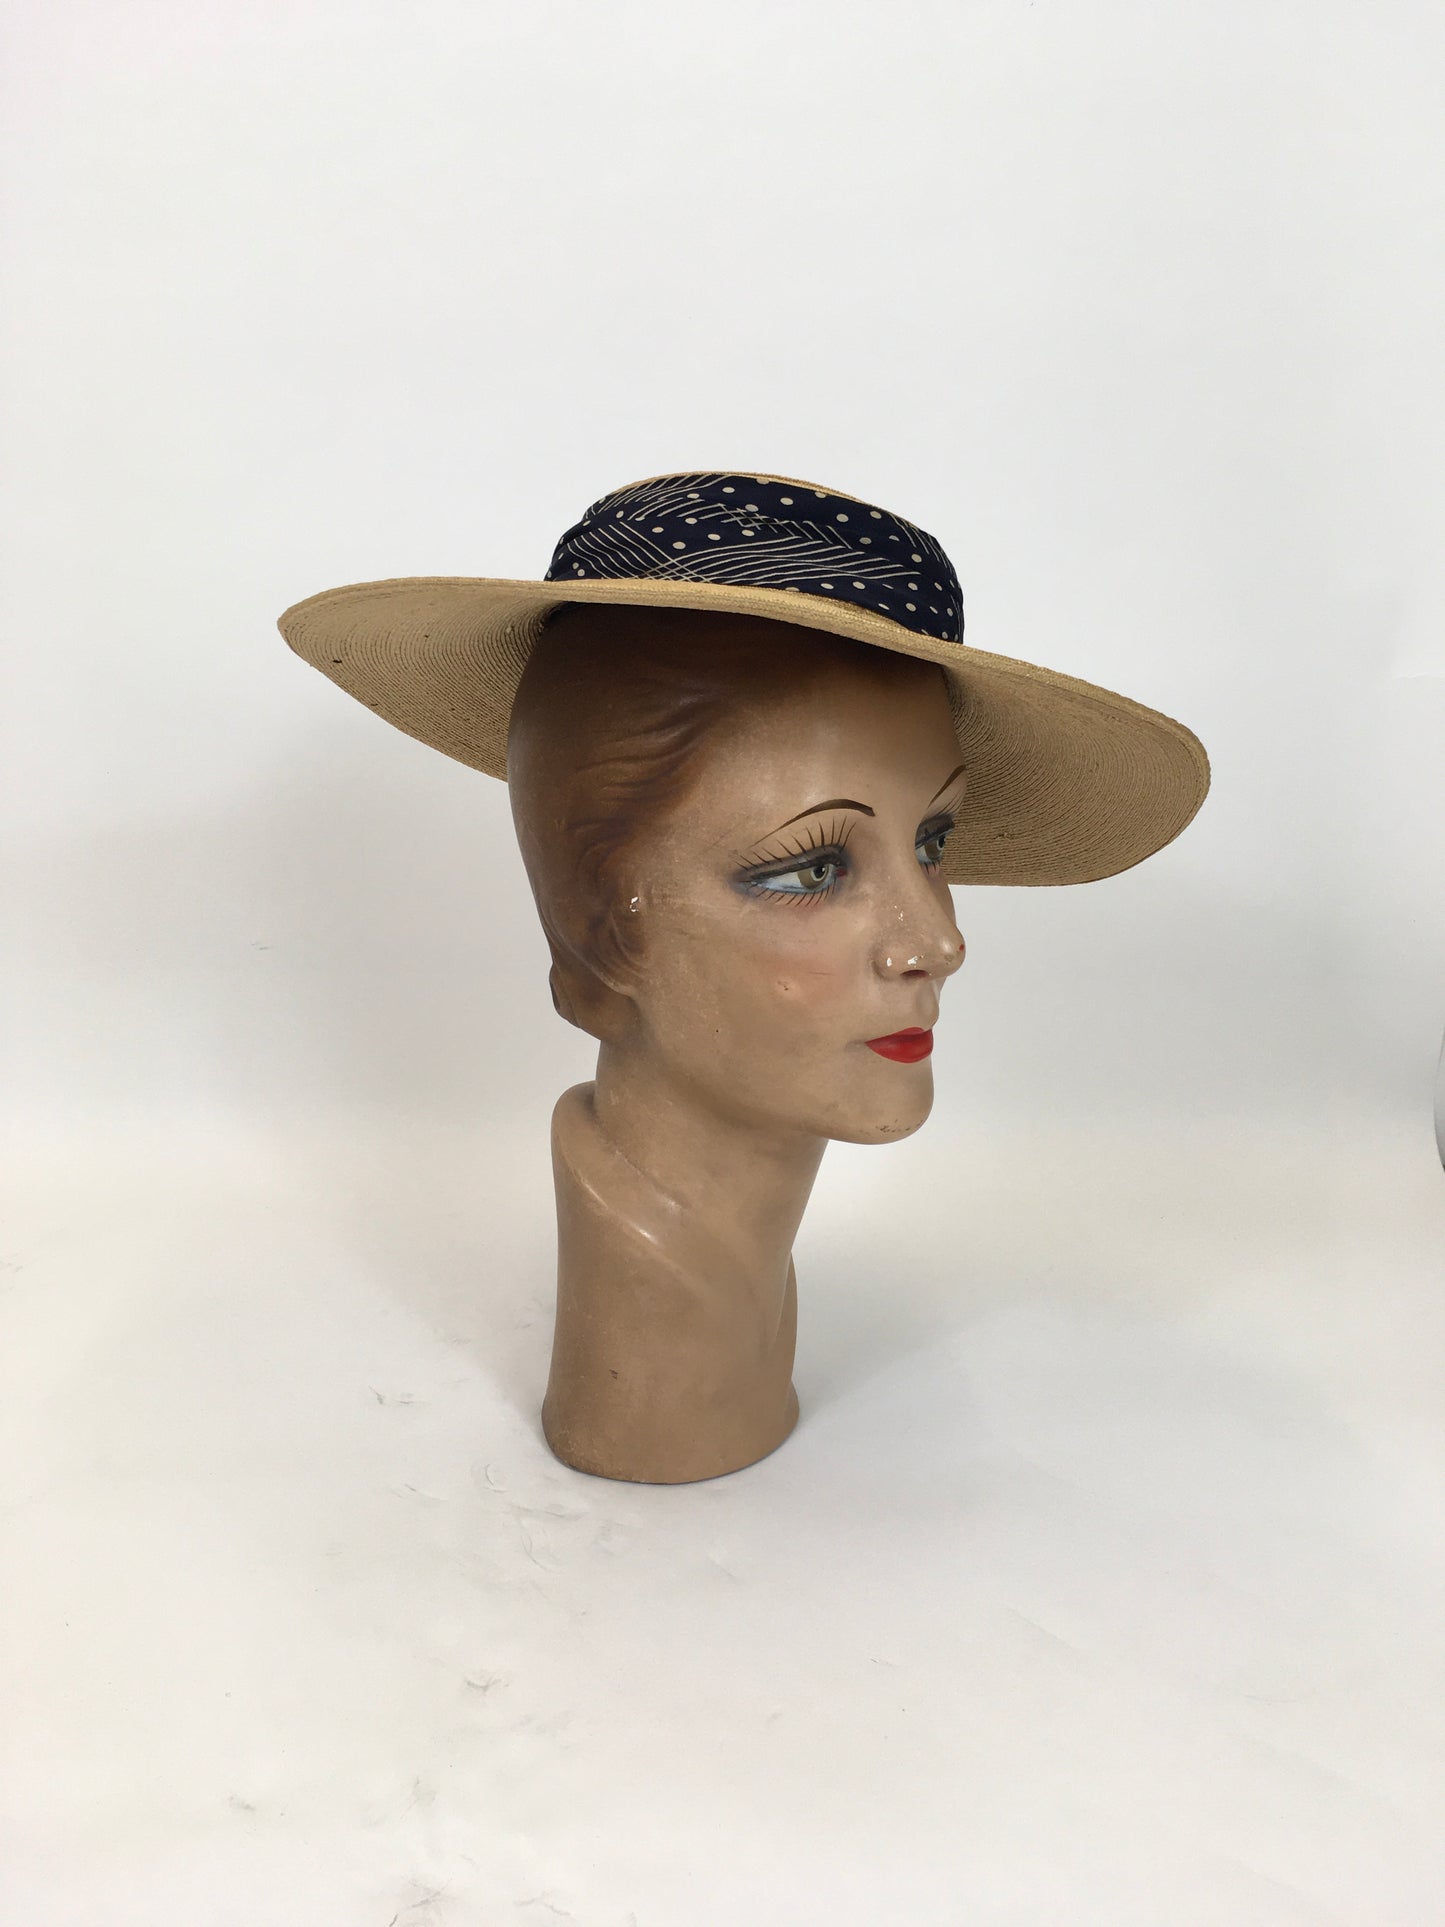 Original 1930s Natural fine Straw Hat - with a Deco ribbon in Navy/white combination.